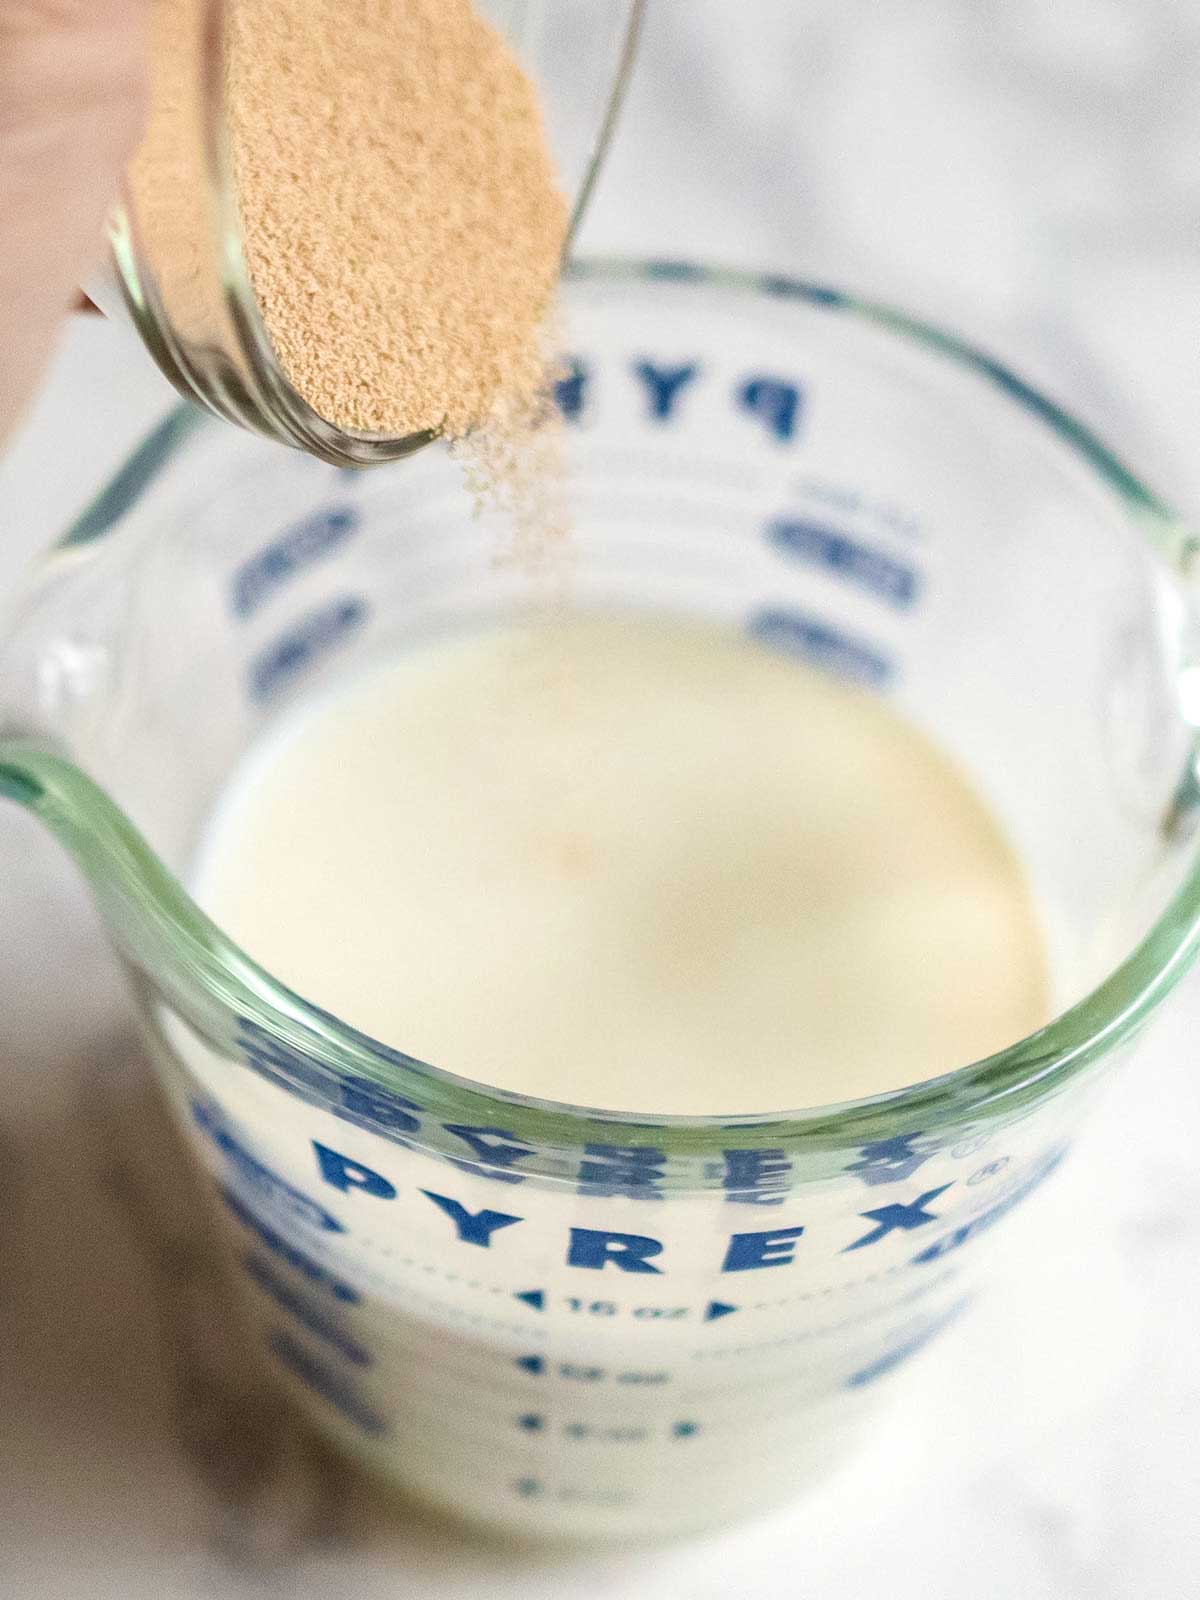 Adding yeast to the heated milk in a measuring cup.